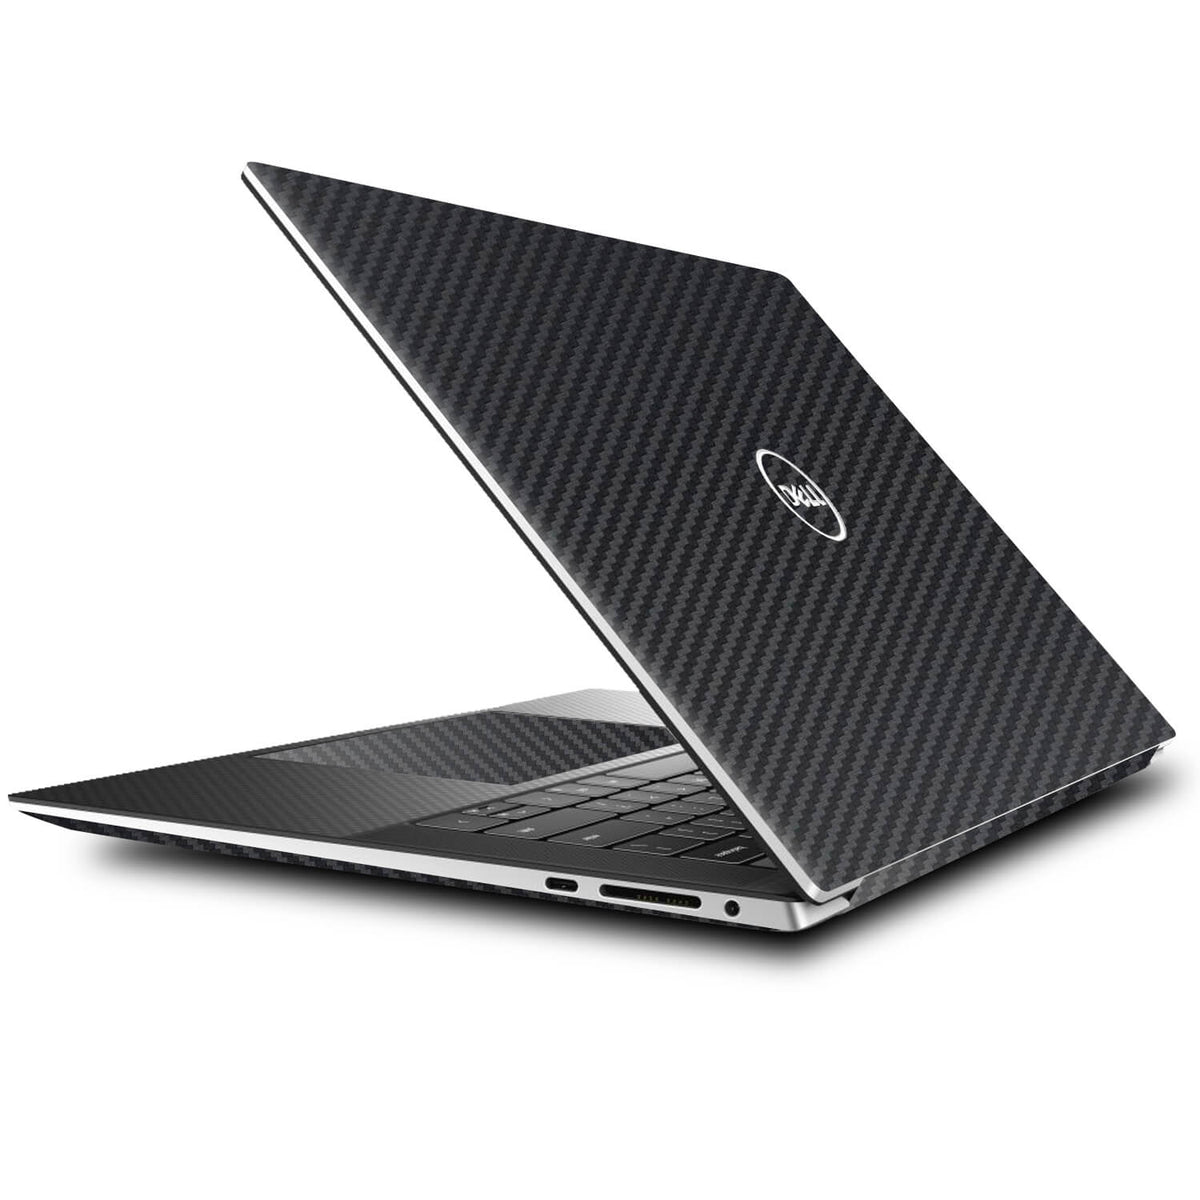 Dell xps 15